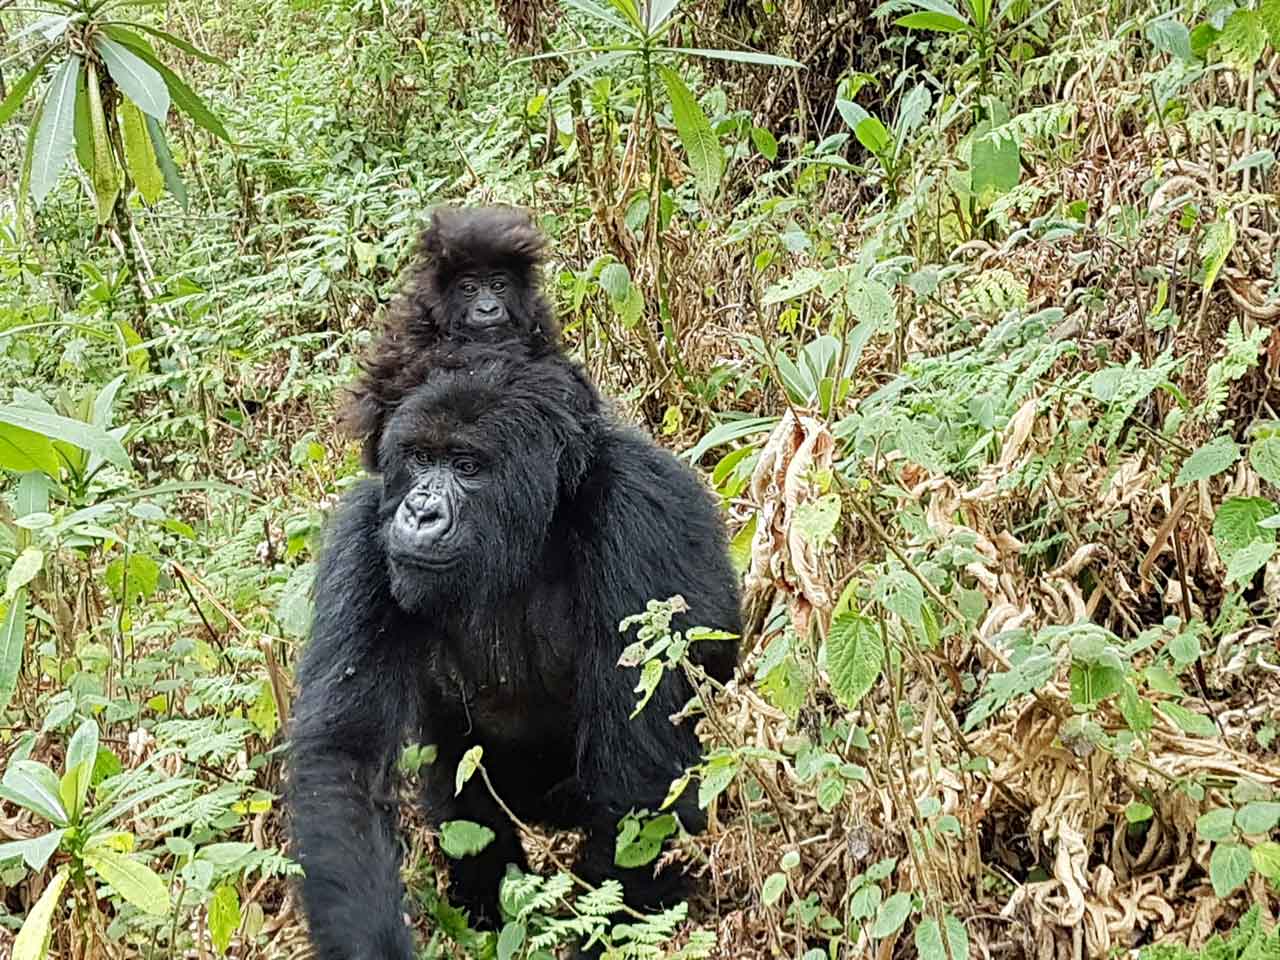 Heart of Africa, Day 6, Gorilla Safari, Motorcycle Tour by Ayres Adventures